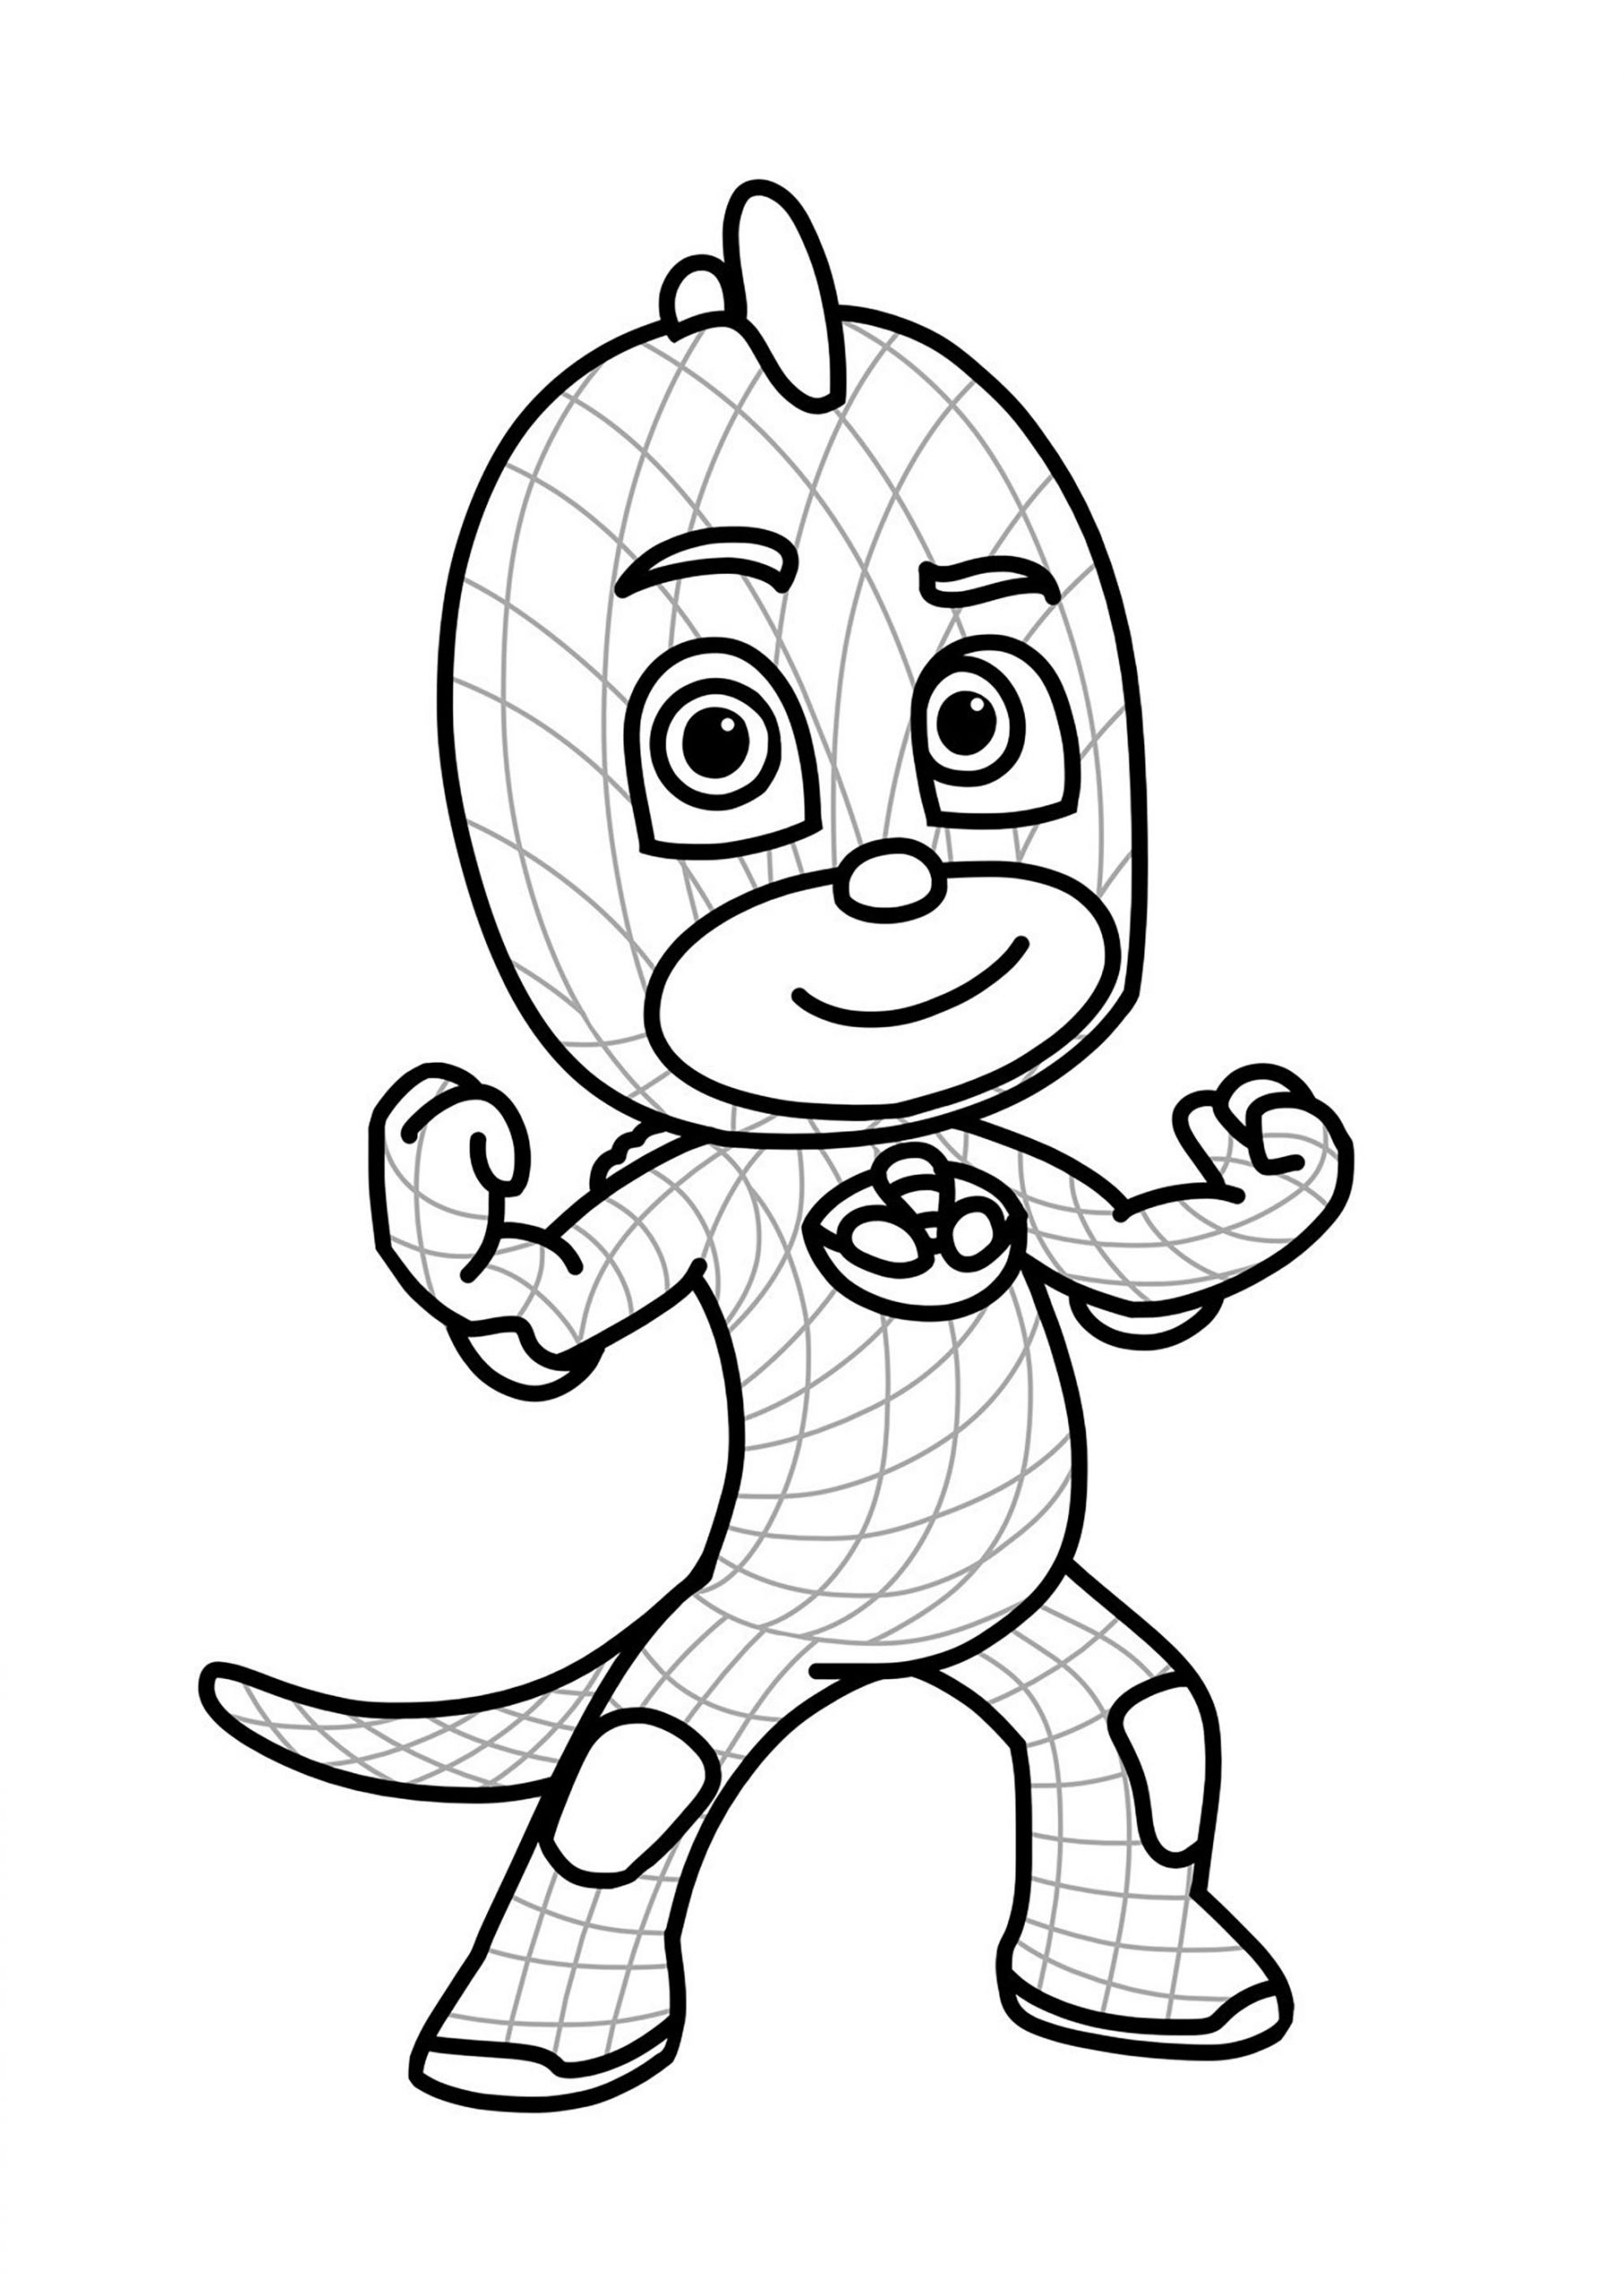 Coloring Sheets For Children
 Pj masks free to color for children PJ Masks Kids